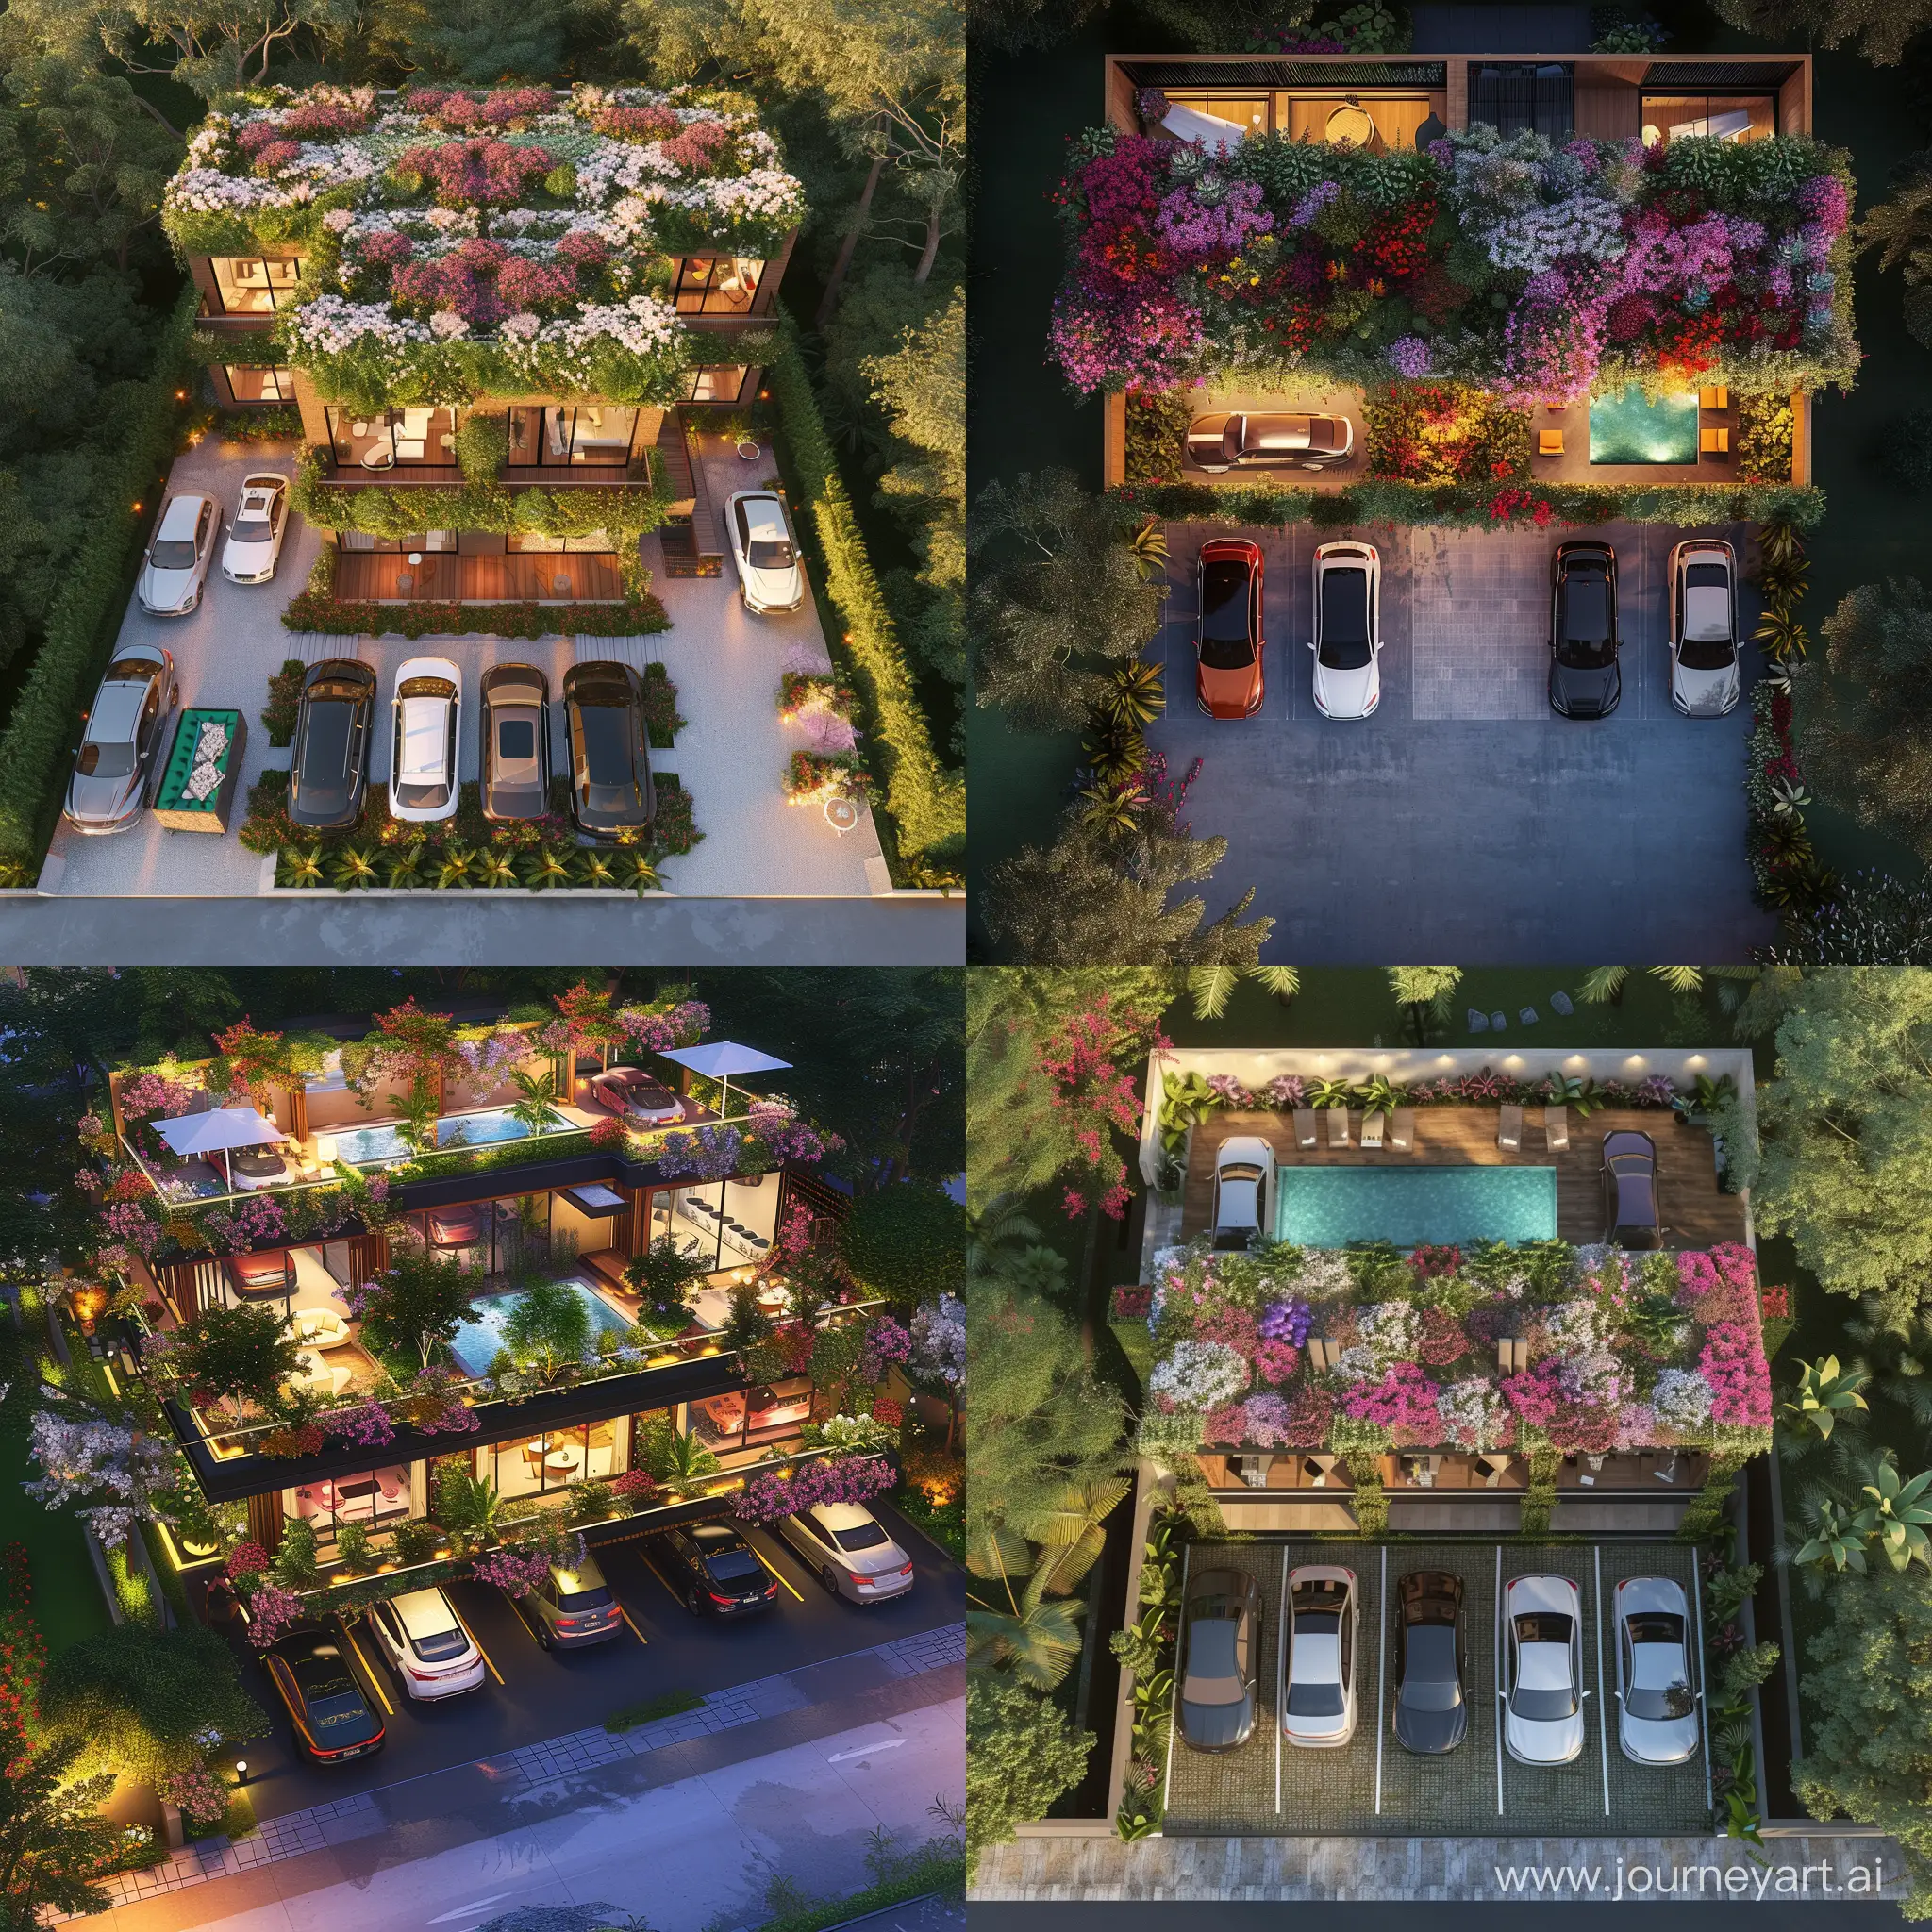 A duplex house with a large yard and a swimming pool for 5 cars in a parking lot with a roof covered with flowers and plants